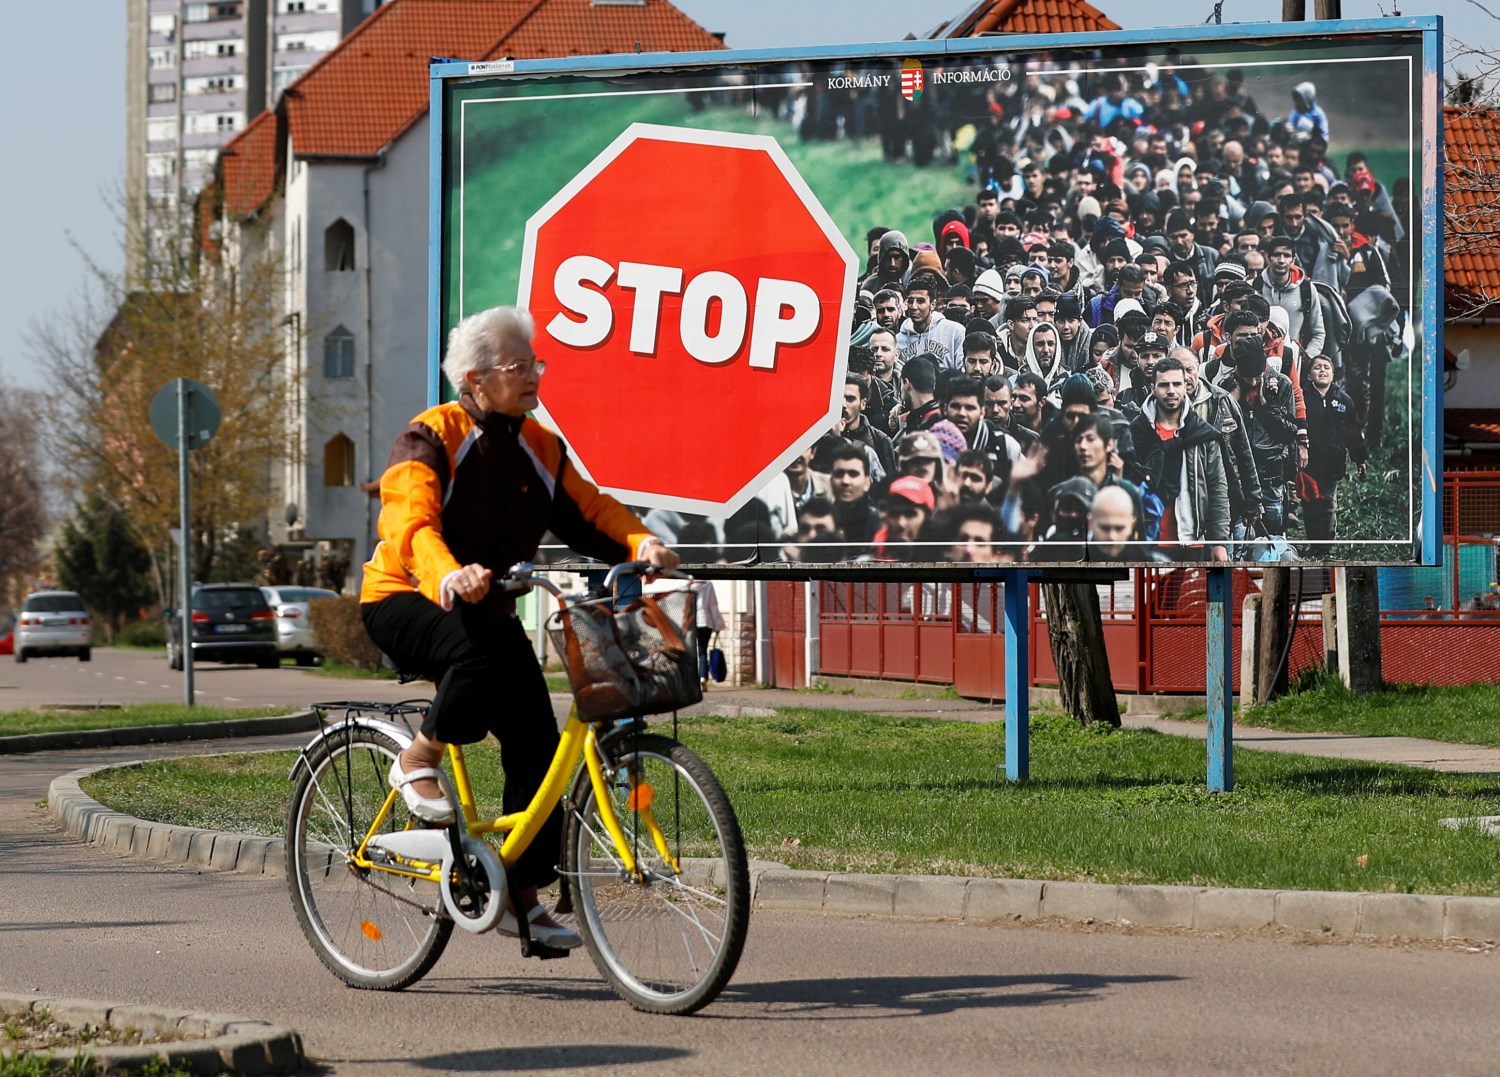 Woman passes by an election poster of Victor Orban's Fidesz party in Gyongyos, Hungary April 8, 2018. REUTERS/Leonhard Foeger - RC1B54A23090